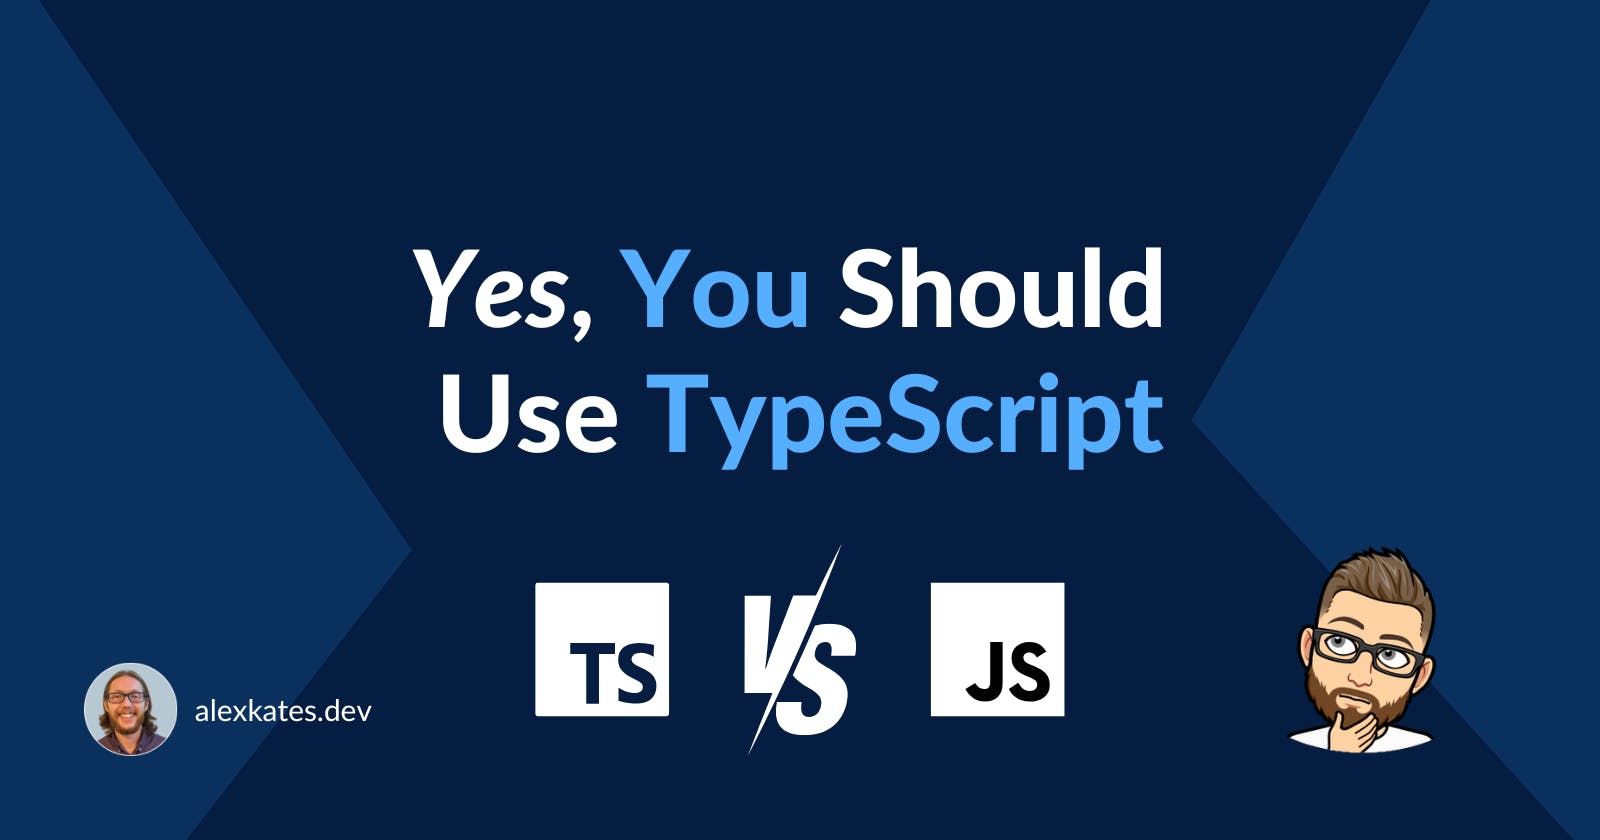 Yes, You Should Use TypeScript